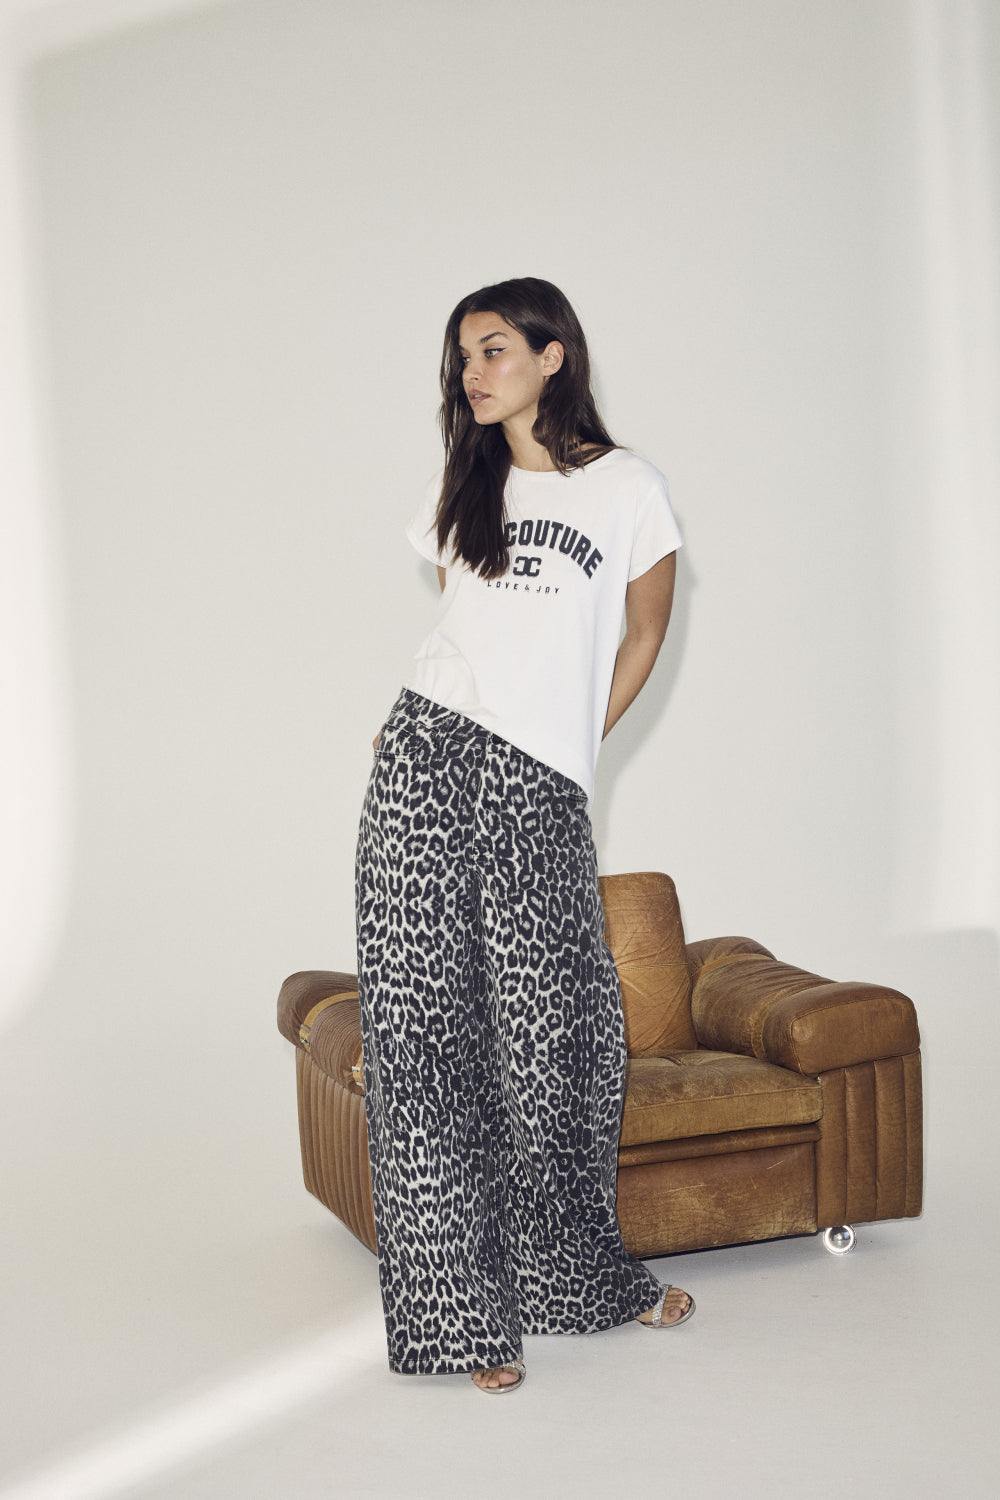 Co'Couture Leo Wide Long Pant - Dark Grey - RUM Amsterdam